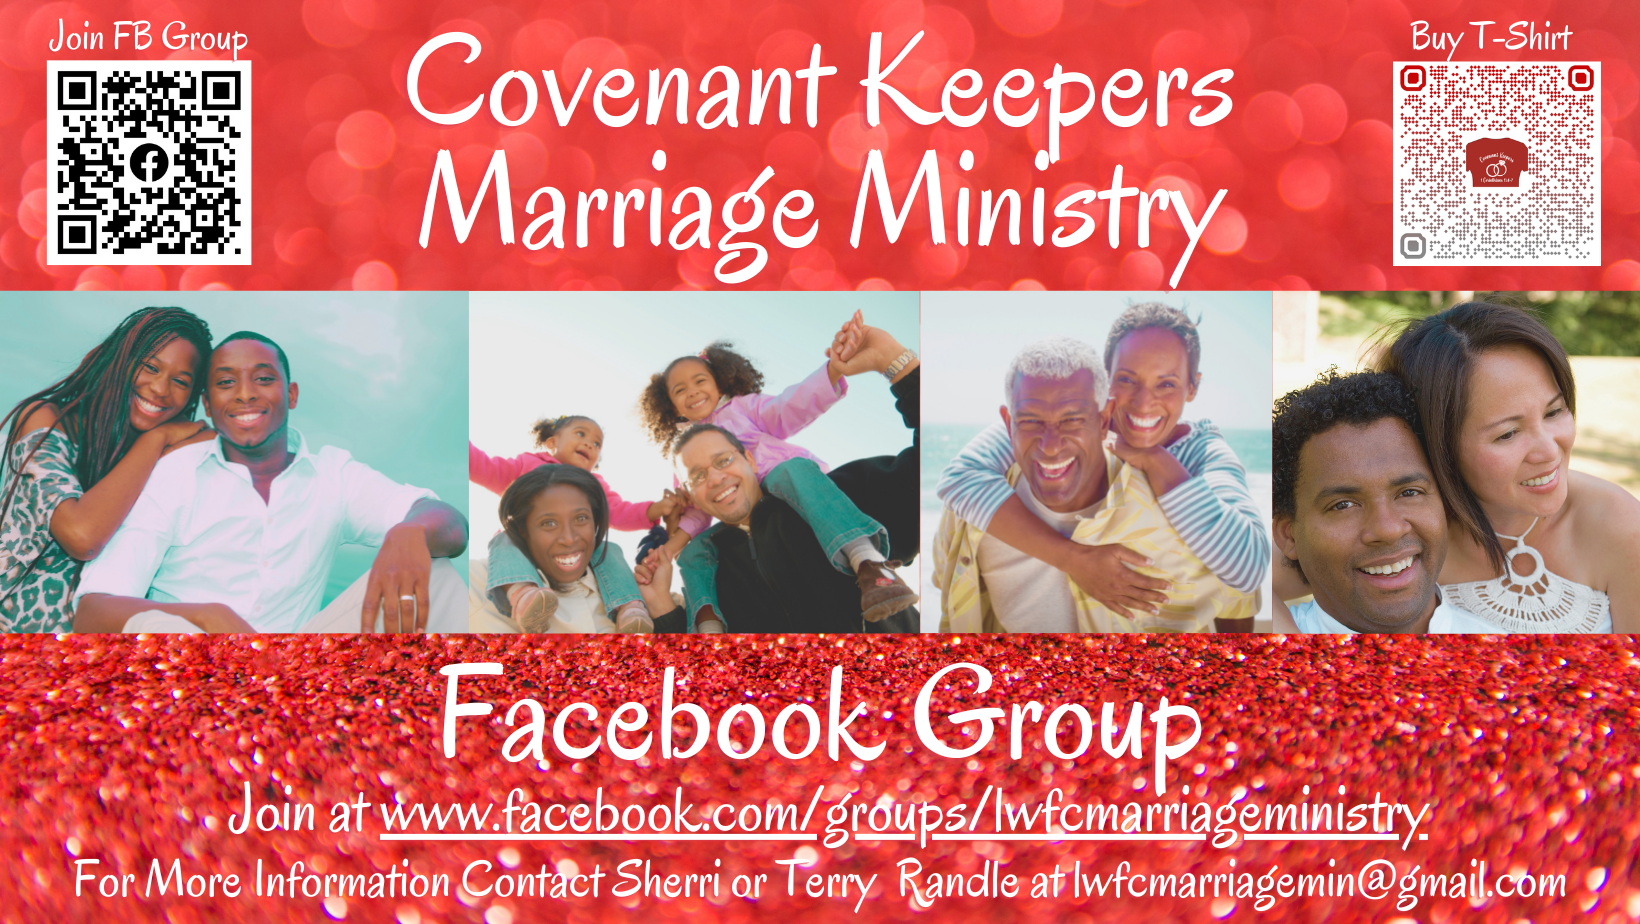 Covenant Keepers Marriage Ministry Facebook Group head image